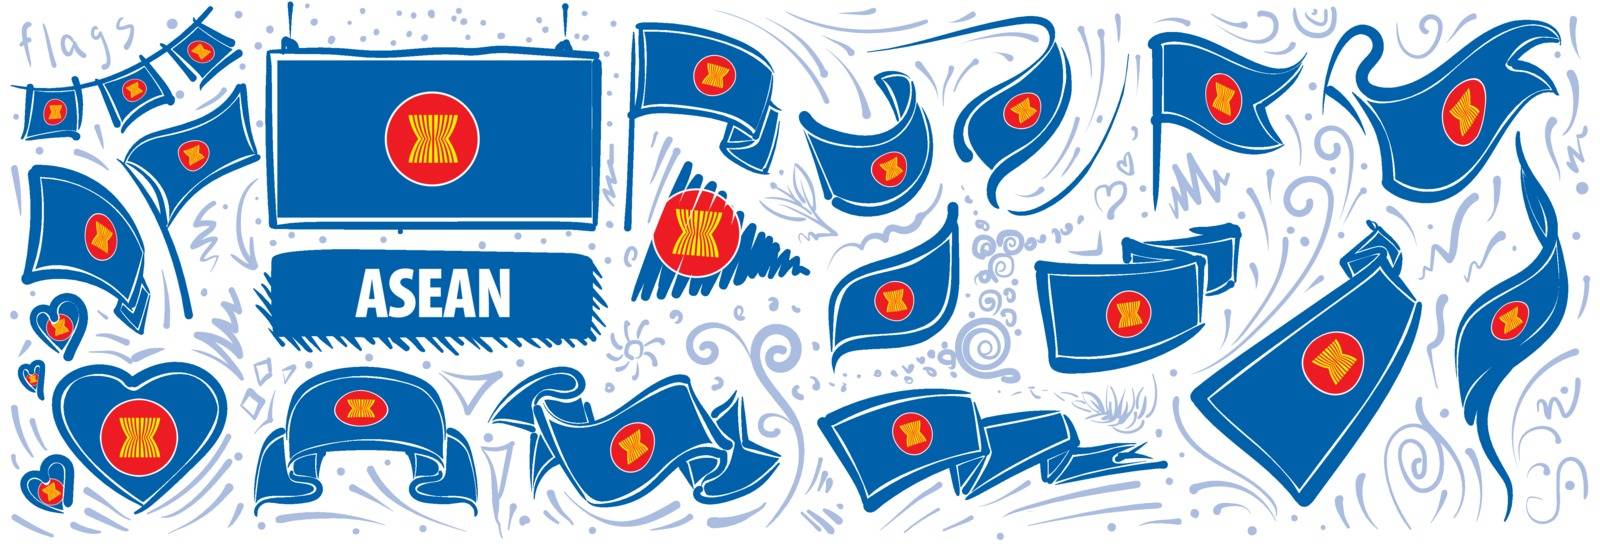 Vector set of the national flag of ASEAN in various creative designs by butenkow